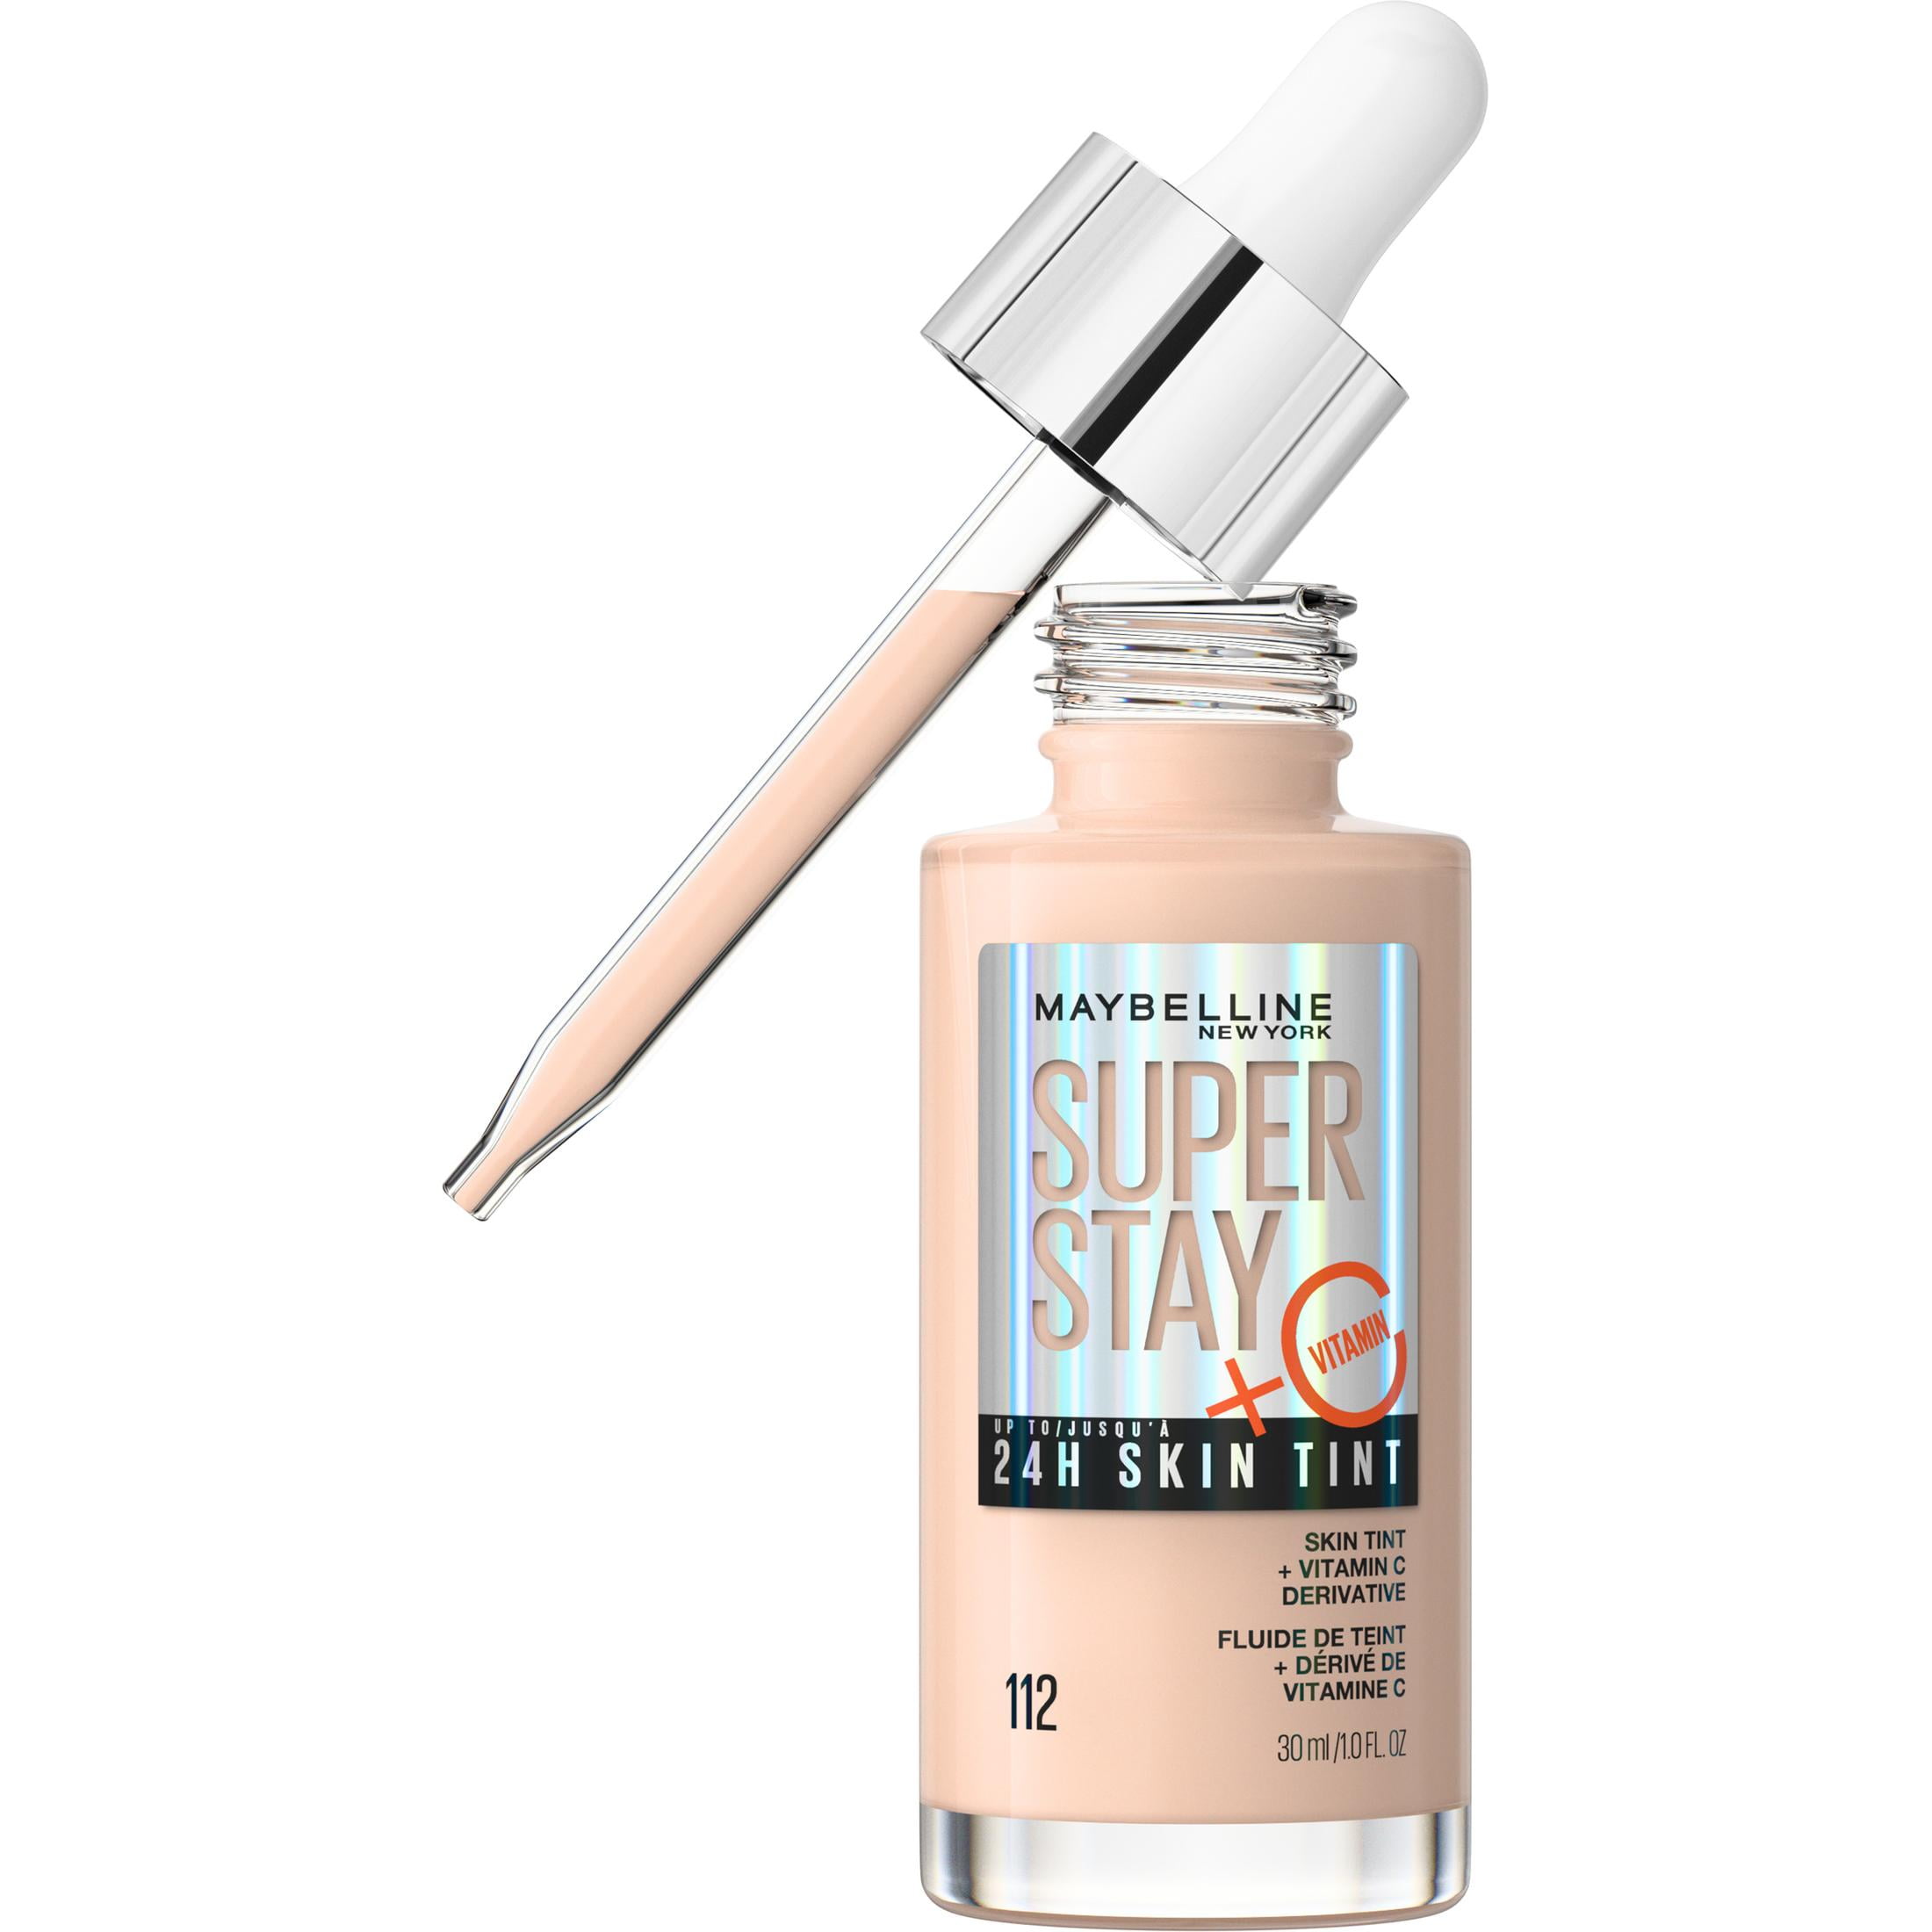 Maybelline Super Stay Super Stay Up to 24HR Skin Tint with Vitamin C ...